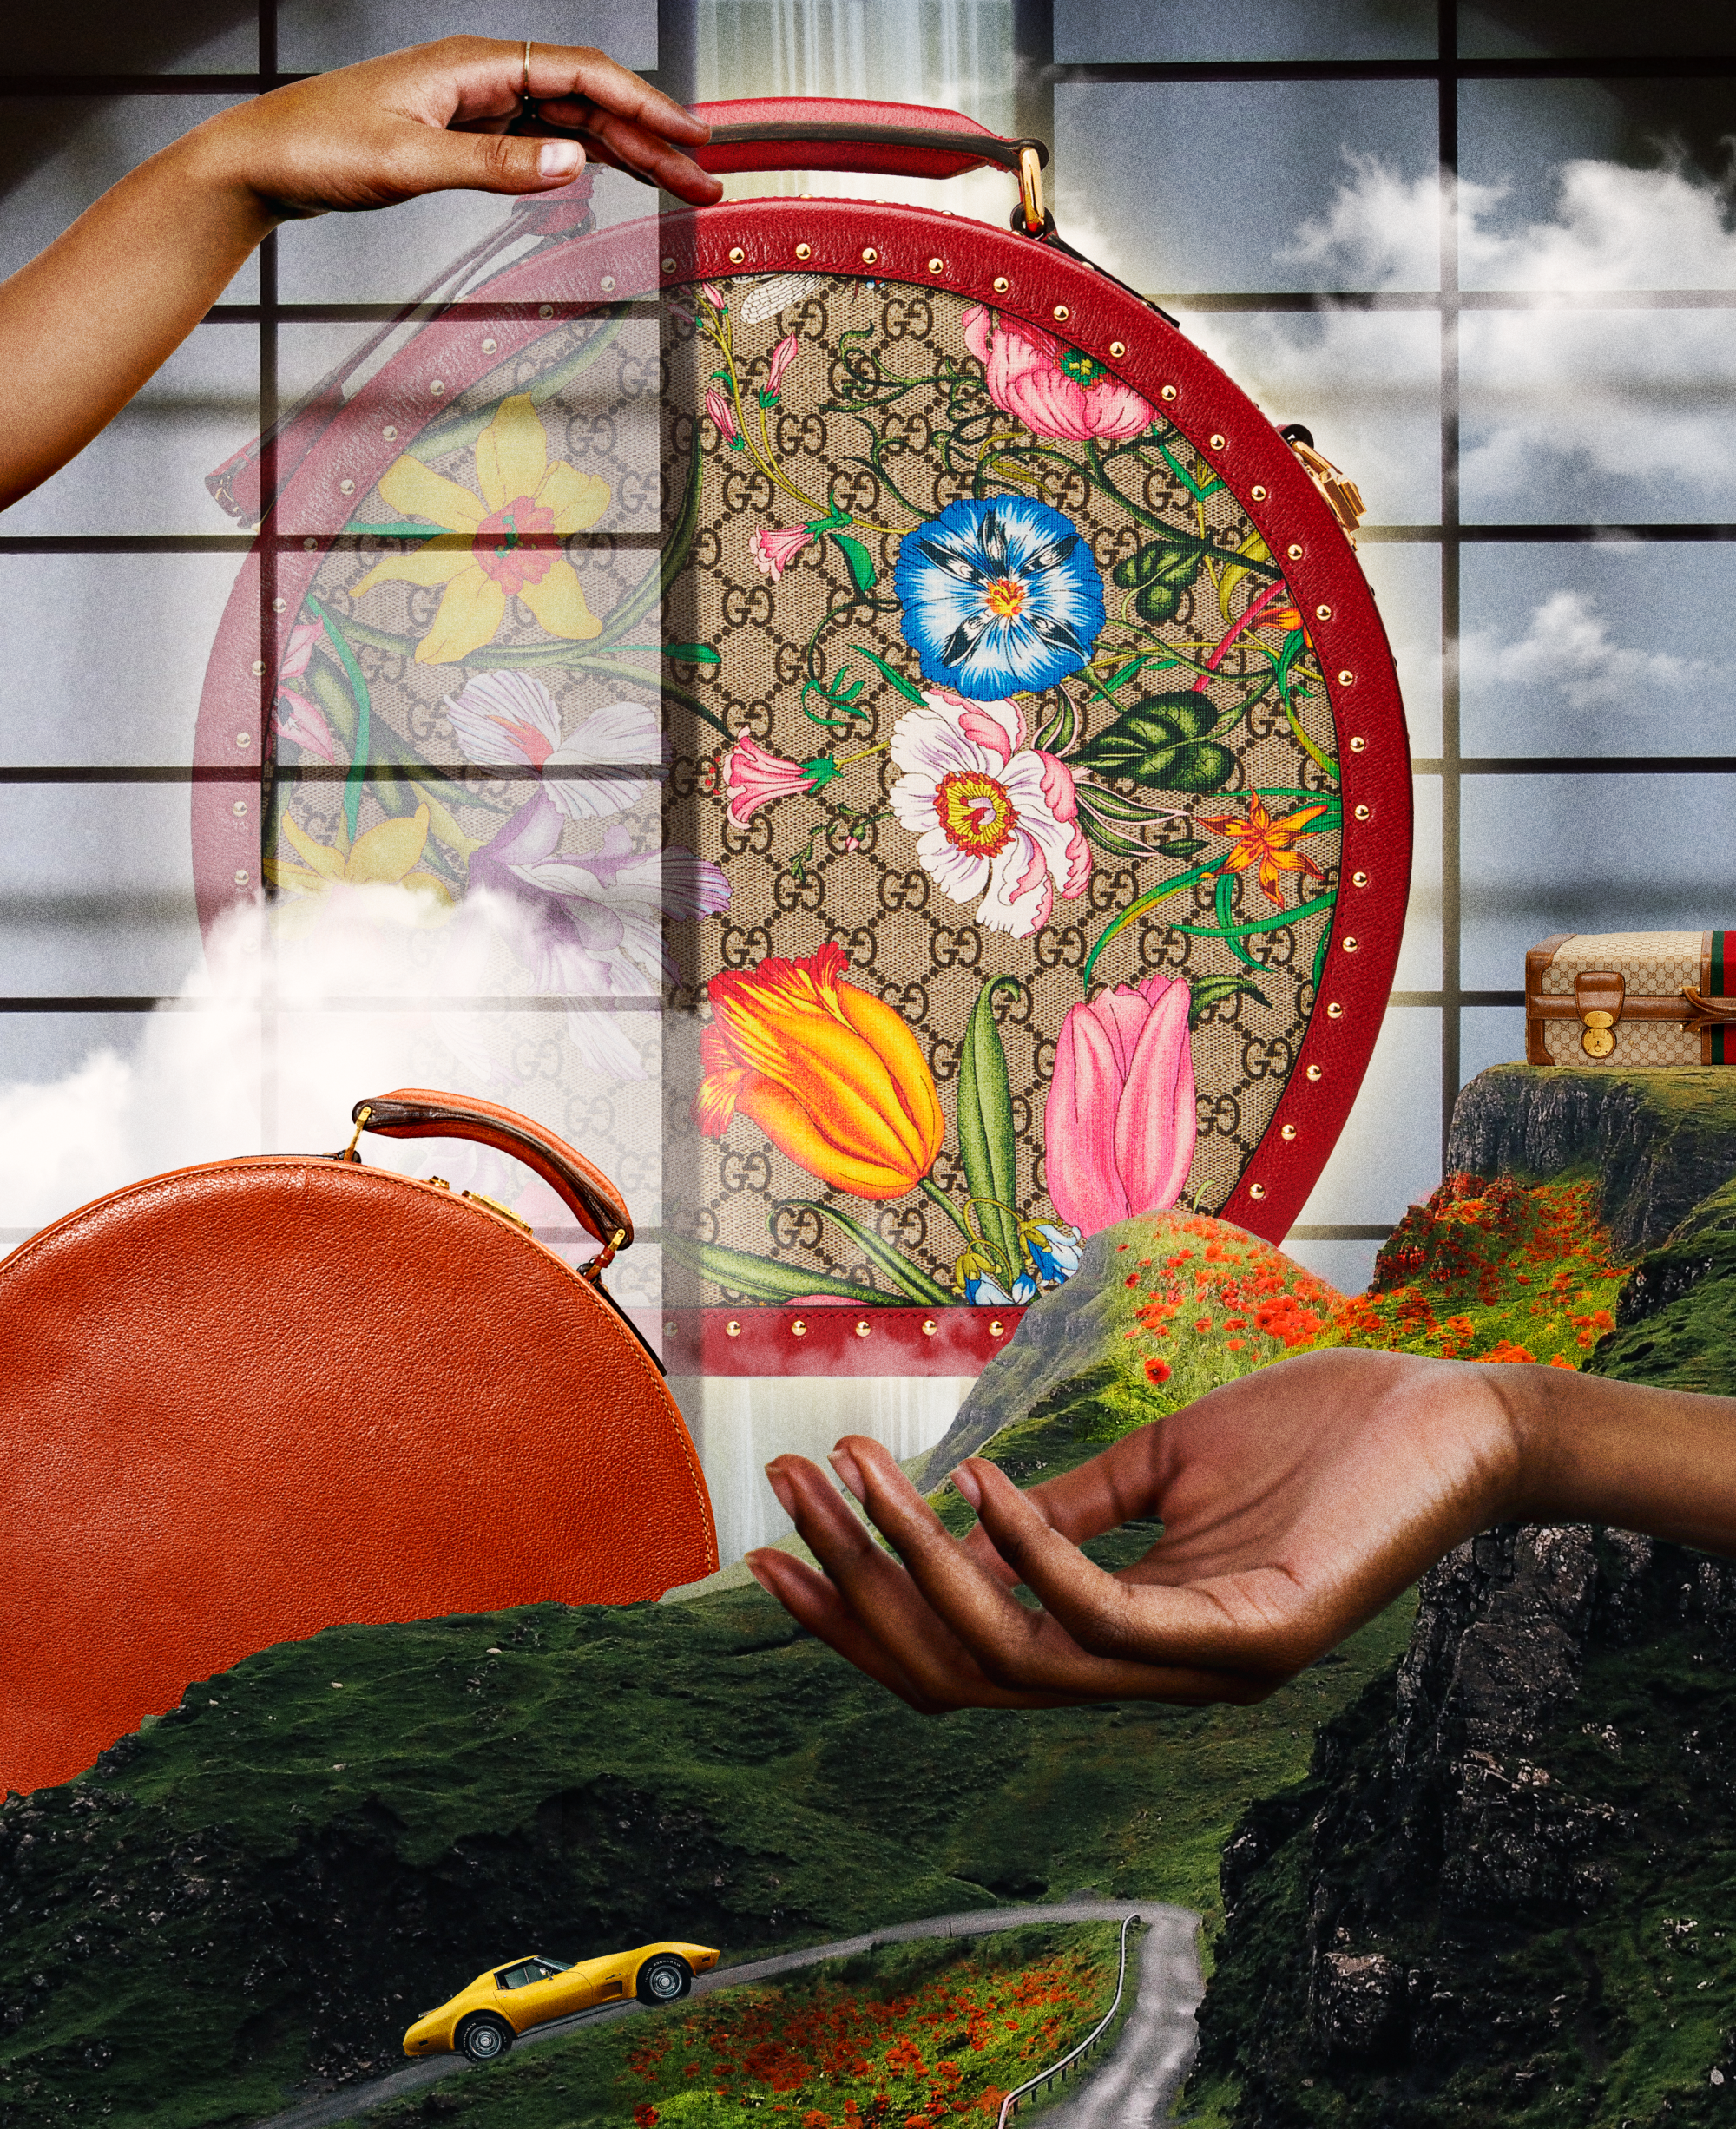 an abstract collage of Gucci luggage peaking through a shoji screen door, surrounded by two large hands and green hills